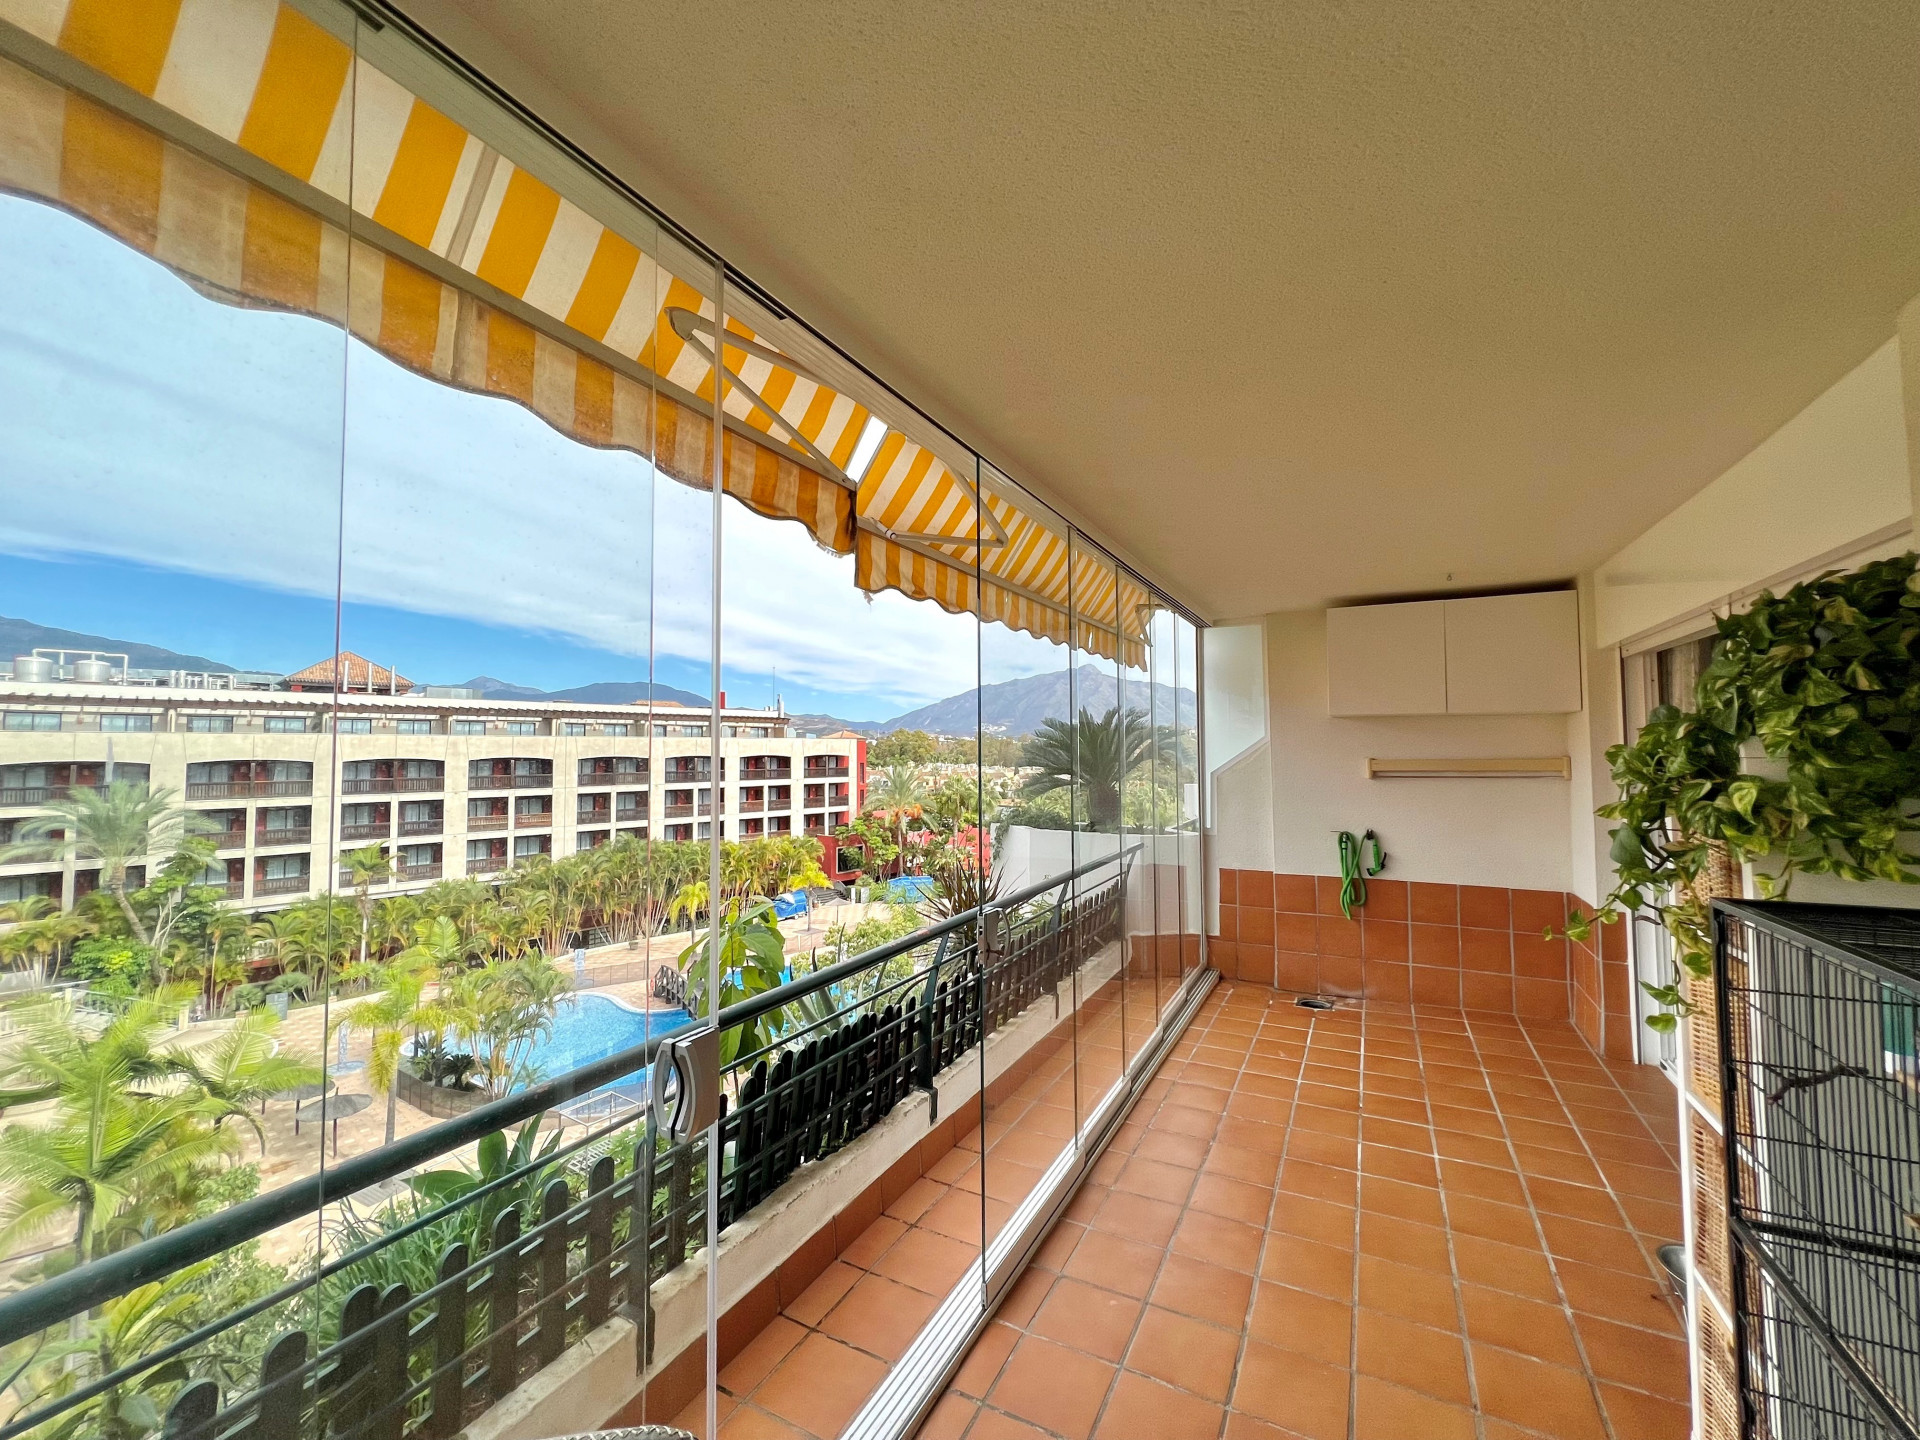 Top floor apartment with a large glazed-in terrace enjoying afternoon sun in Campos de Guadalmina